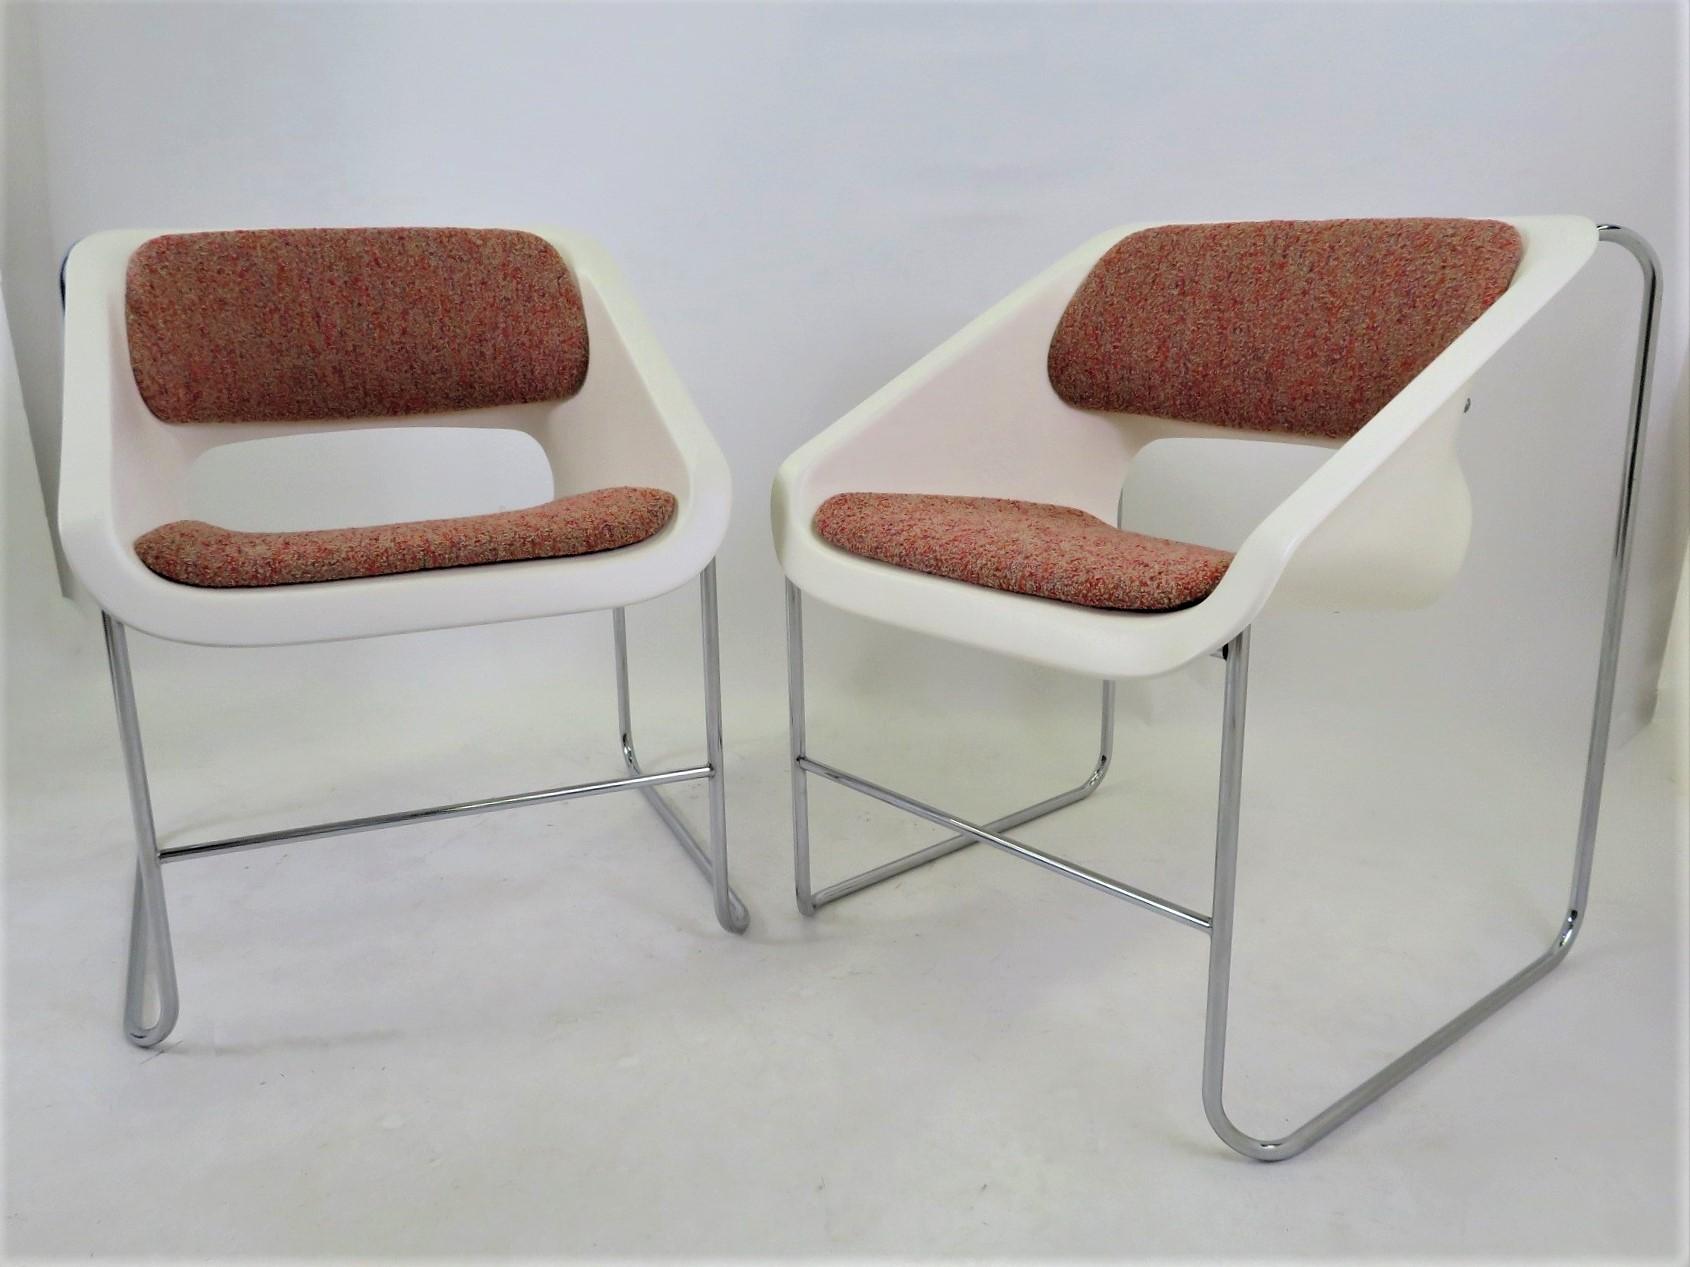 Space Modern 4 Stackable Lotus Armchairs by Paul Boulva for Artopex, Canada 1976 10